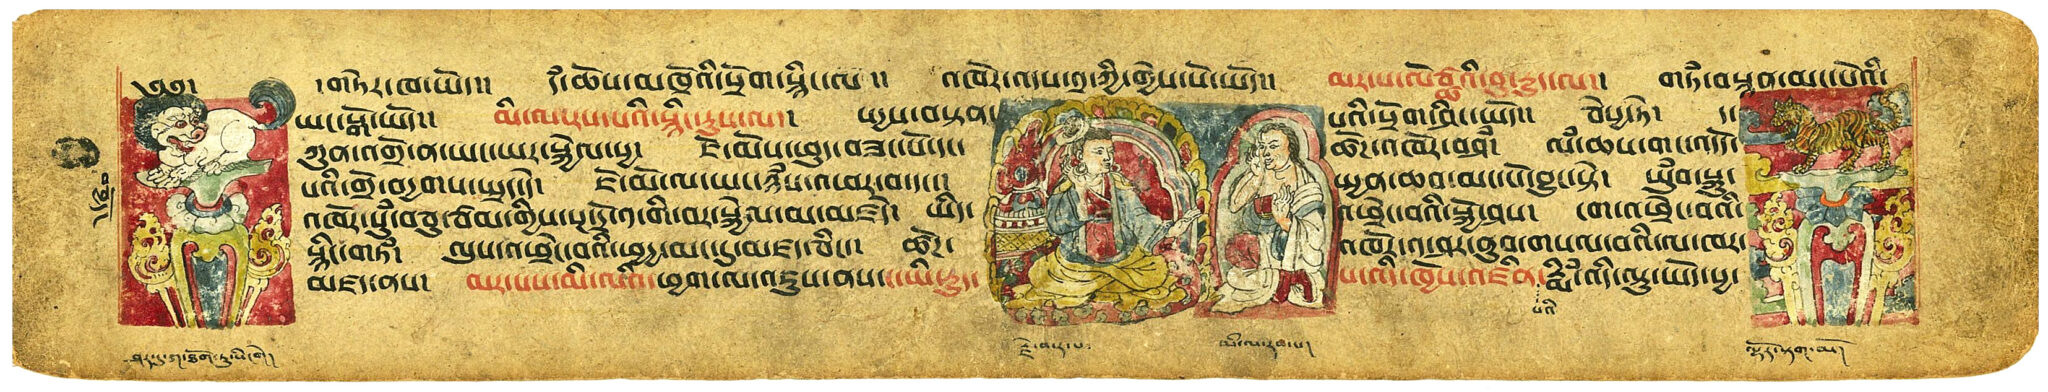 Rectangular, turmeric-yellow page featuring Tibetan text and three illuminations in color depicting fantastical creatures and figures